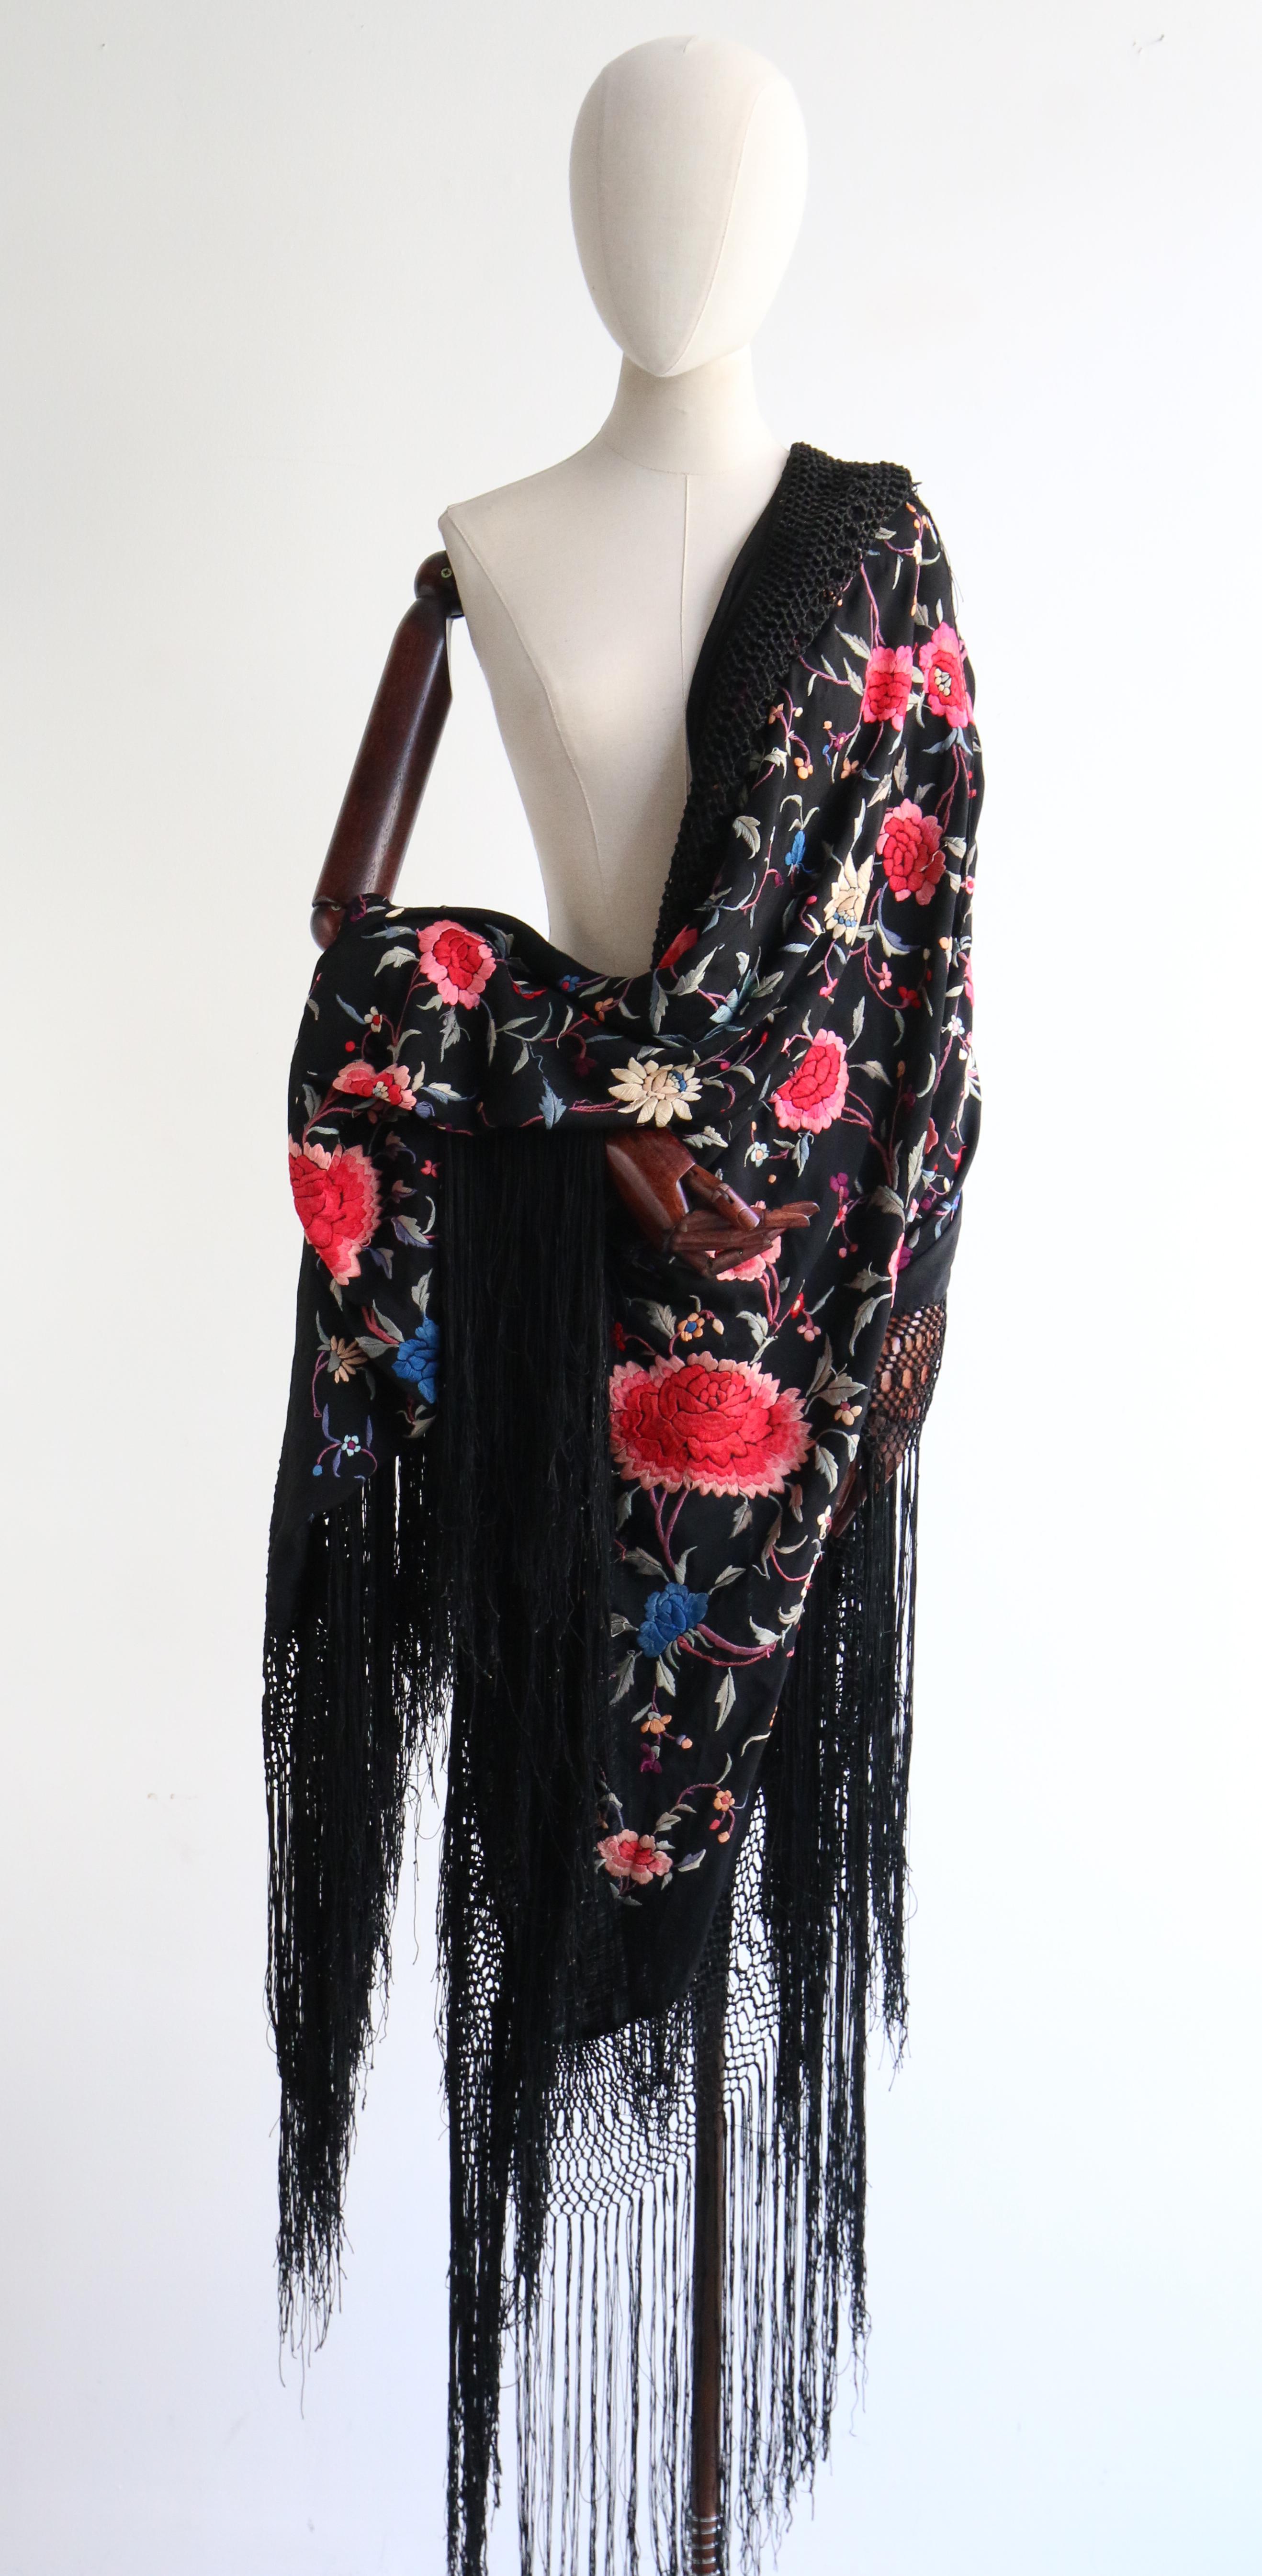 This magnificent 1920's large silk square shawl, in the darkest shade of midnight black, is the perfect accessory for your vintage collection.

Fully embellished in silk floral embroidery, in shades of pink, blue, green, cream and purple in a